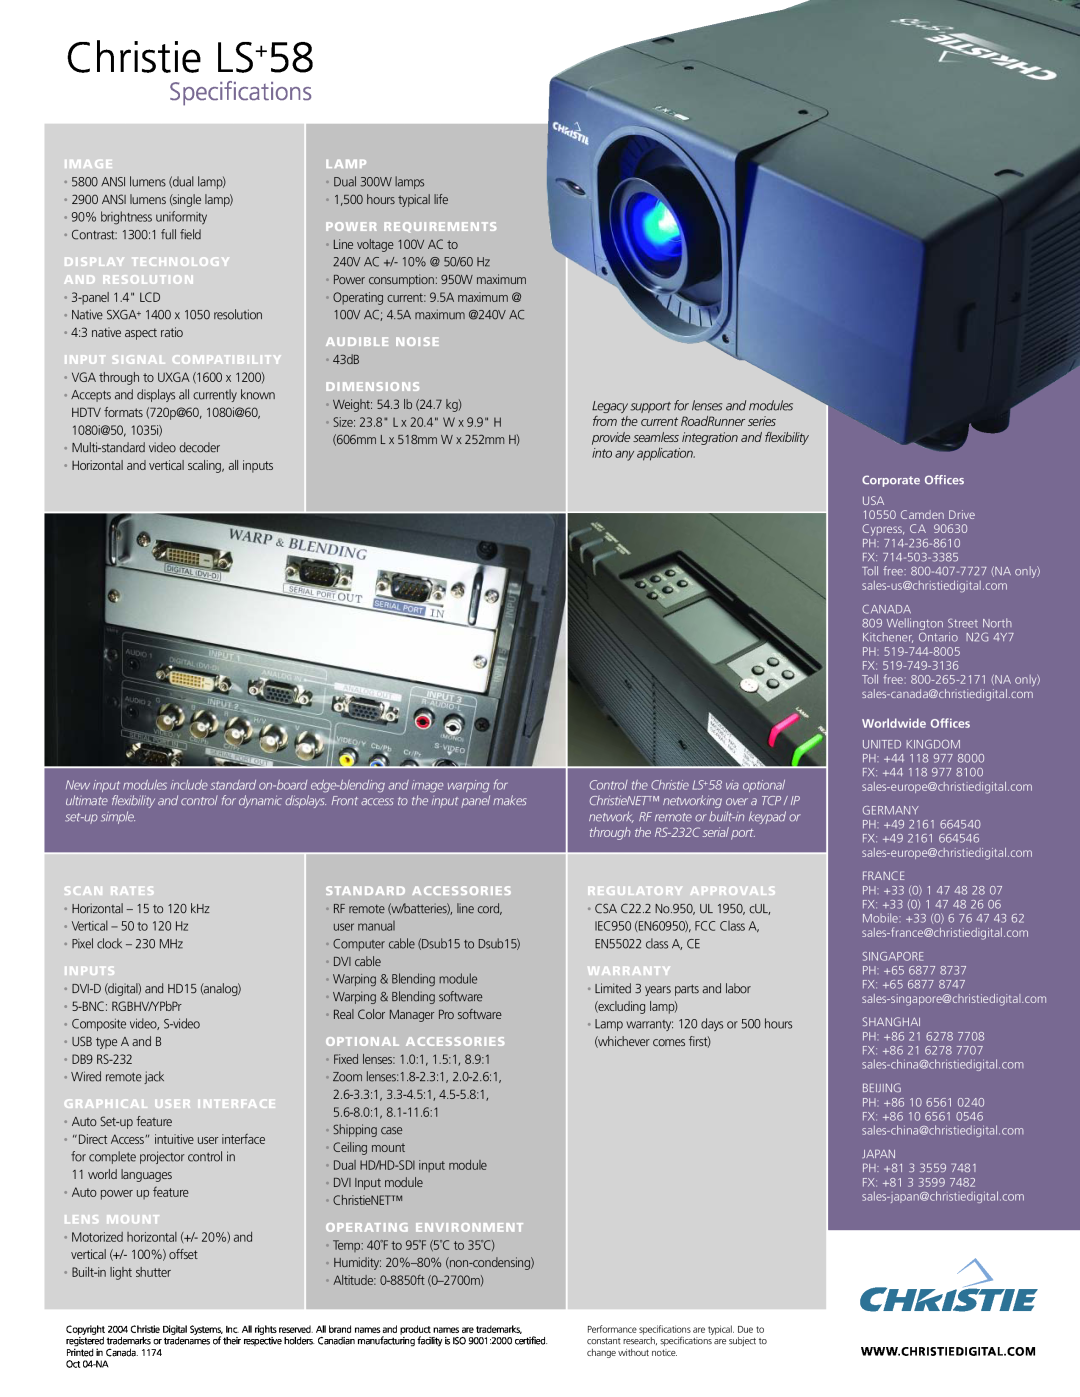 Christie Digital Systems manual Christie LS+58, Specifications, set-up simple, through the RS-232C serial port 